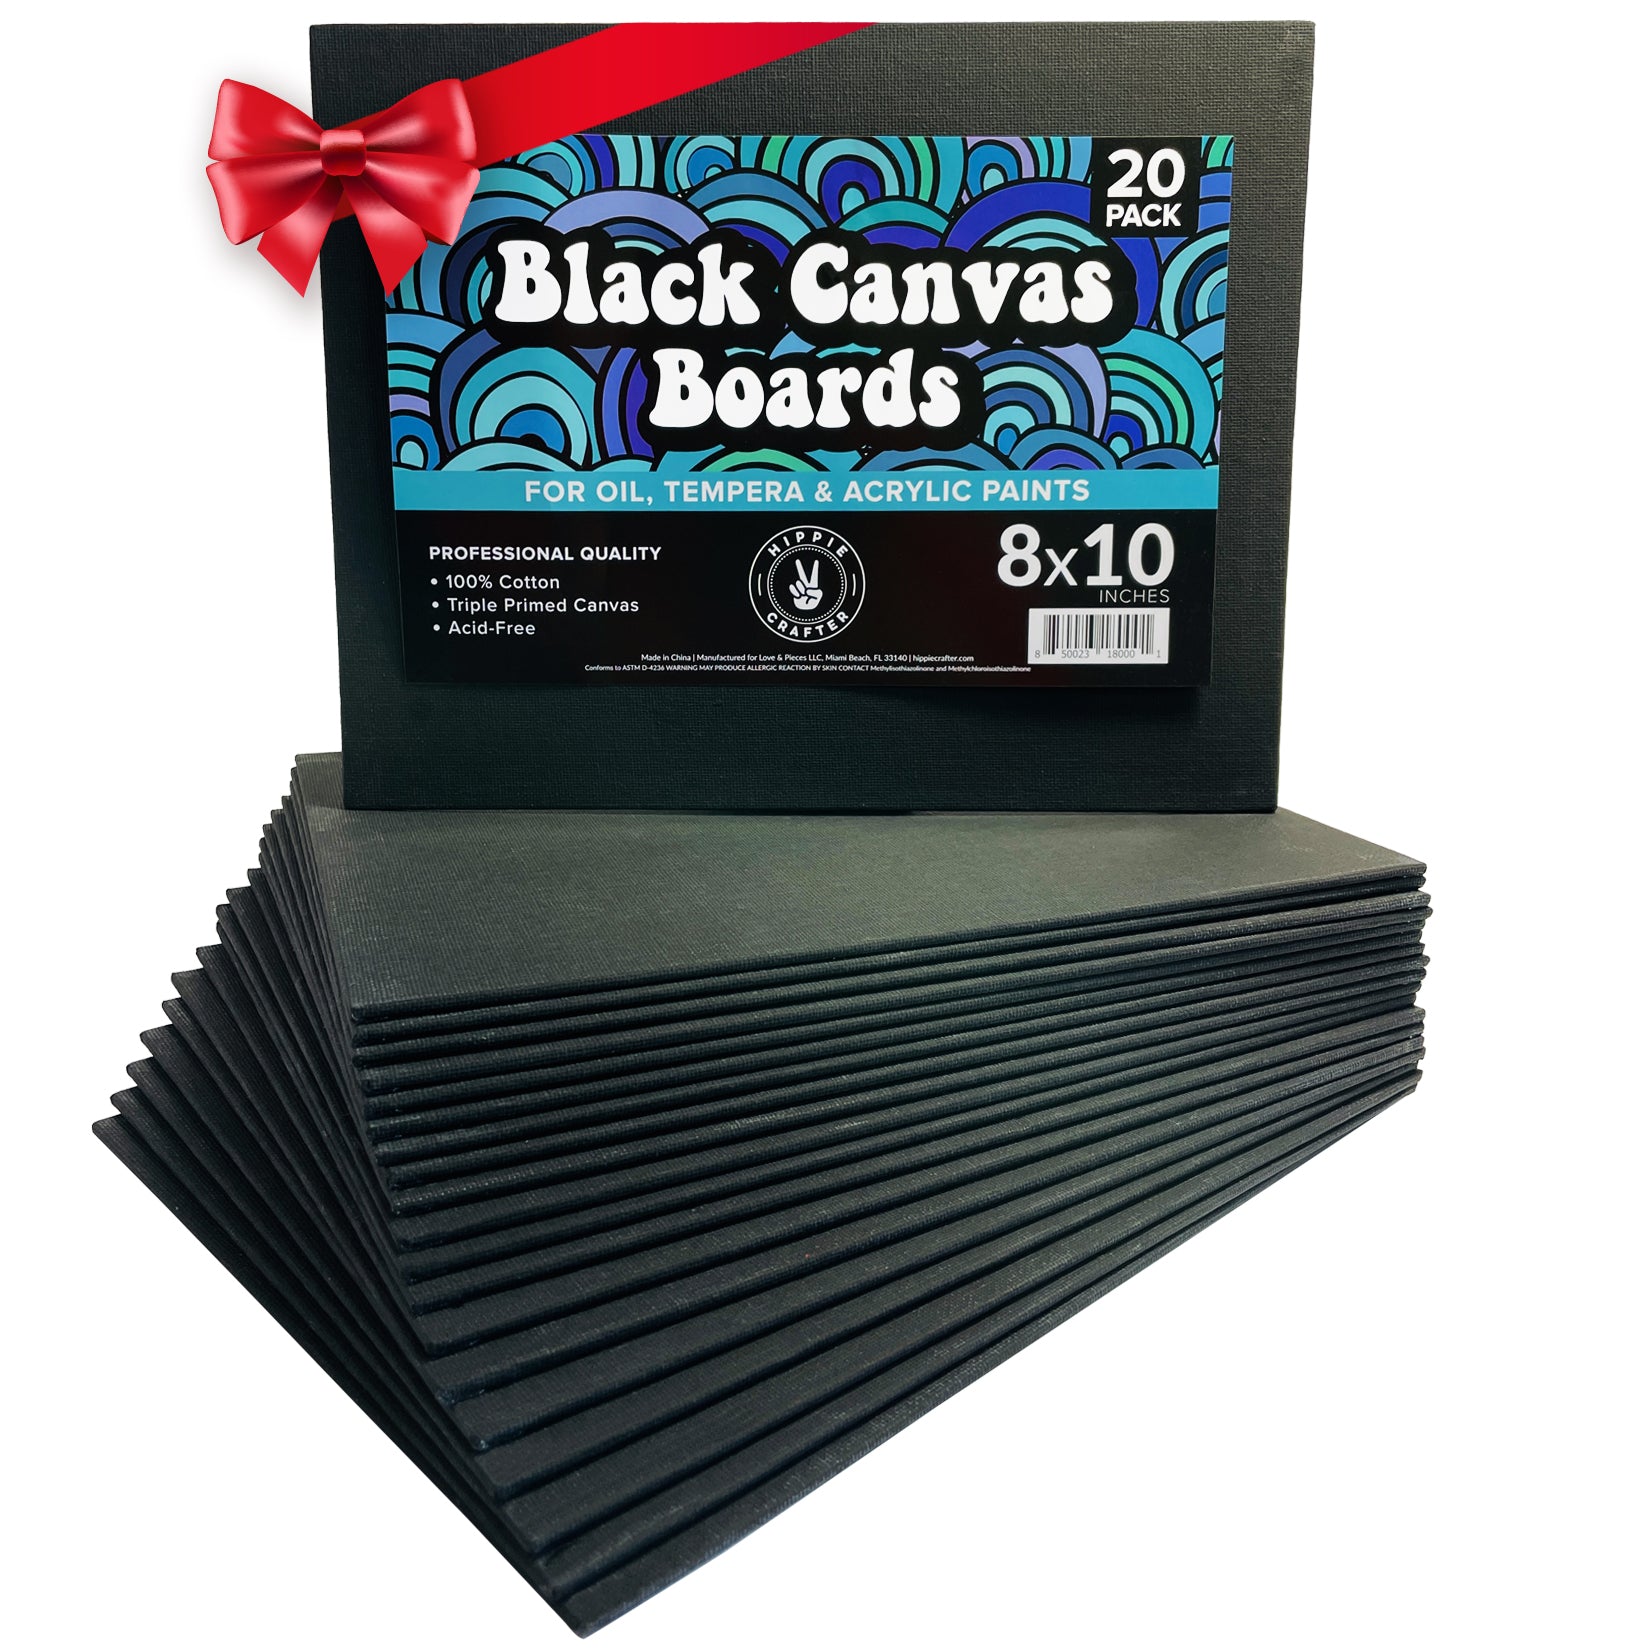 7 PACK Art Supply Stretched Canvas Blank Canvas for Painting Bulk